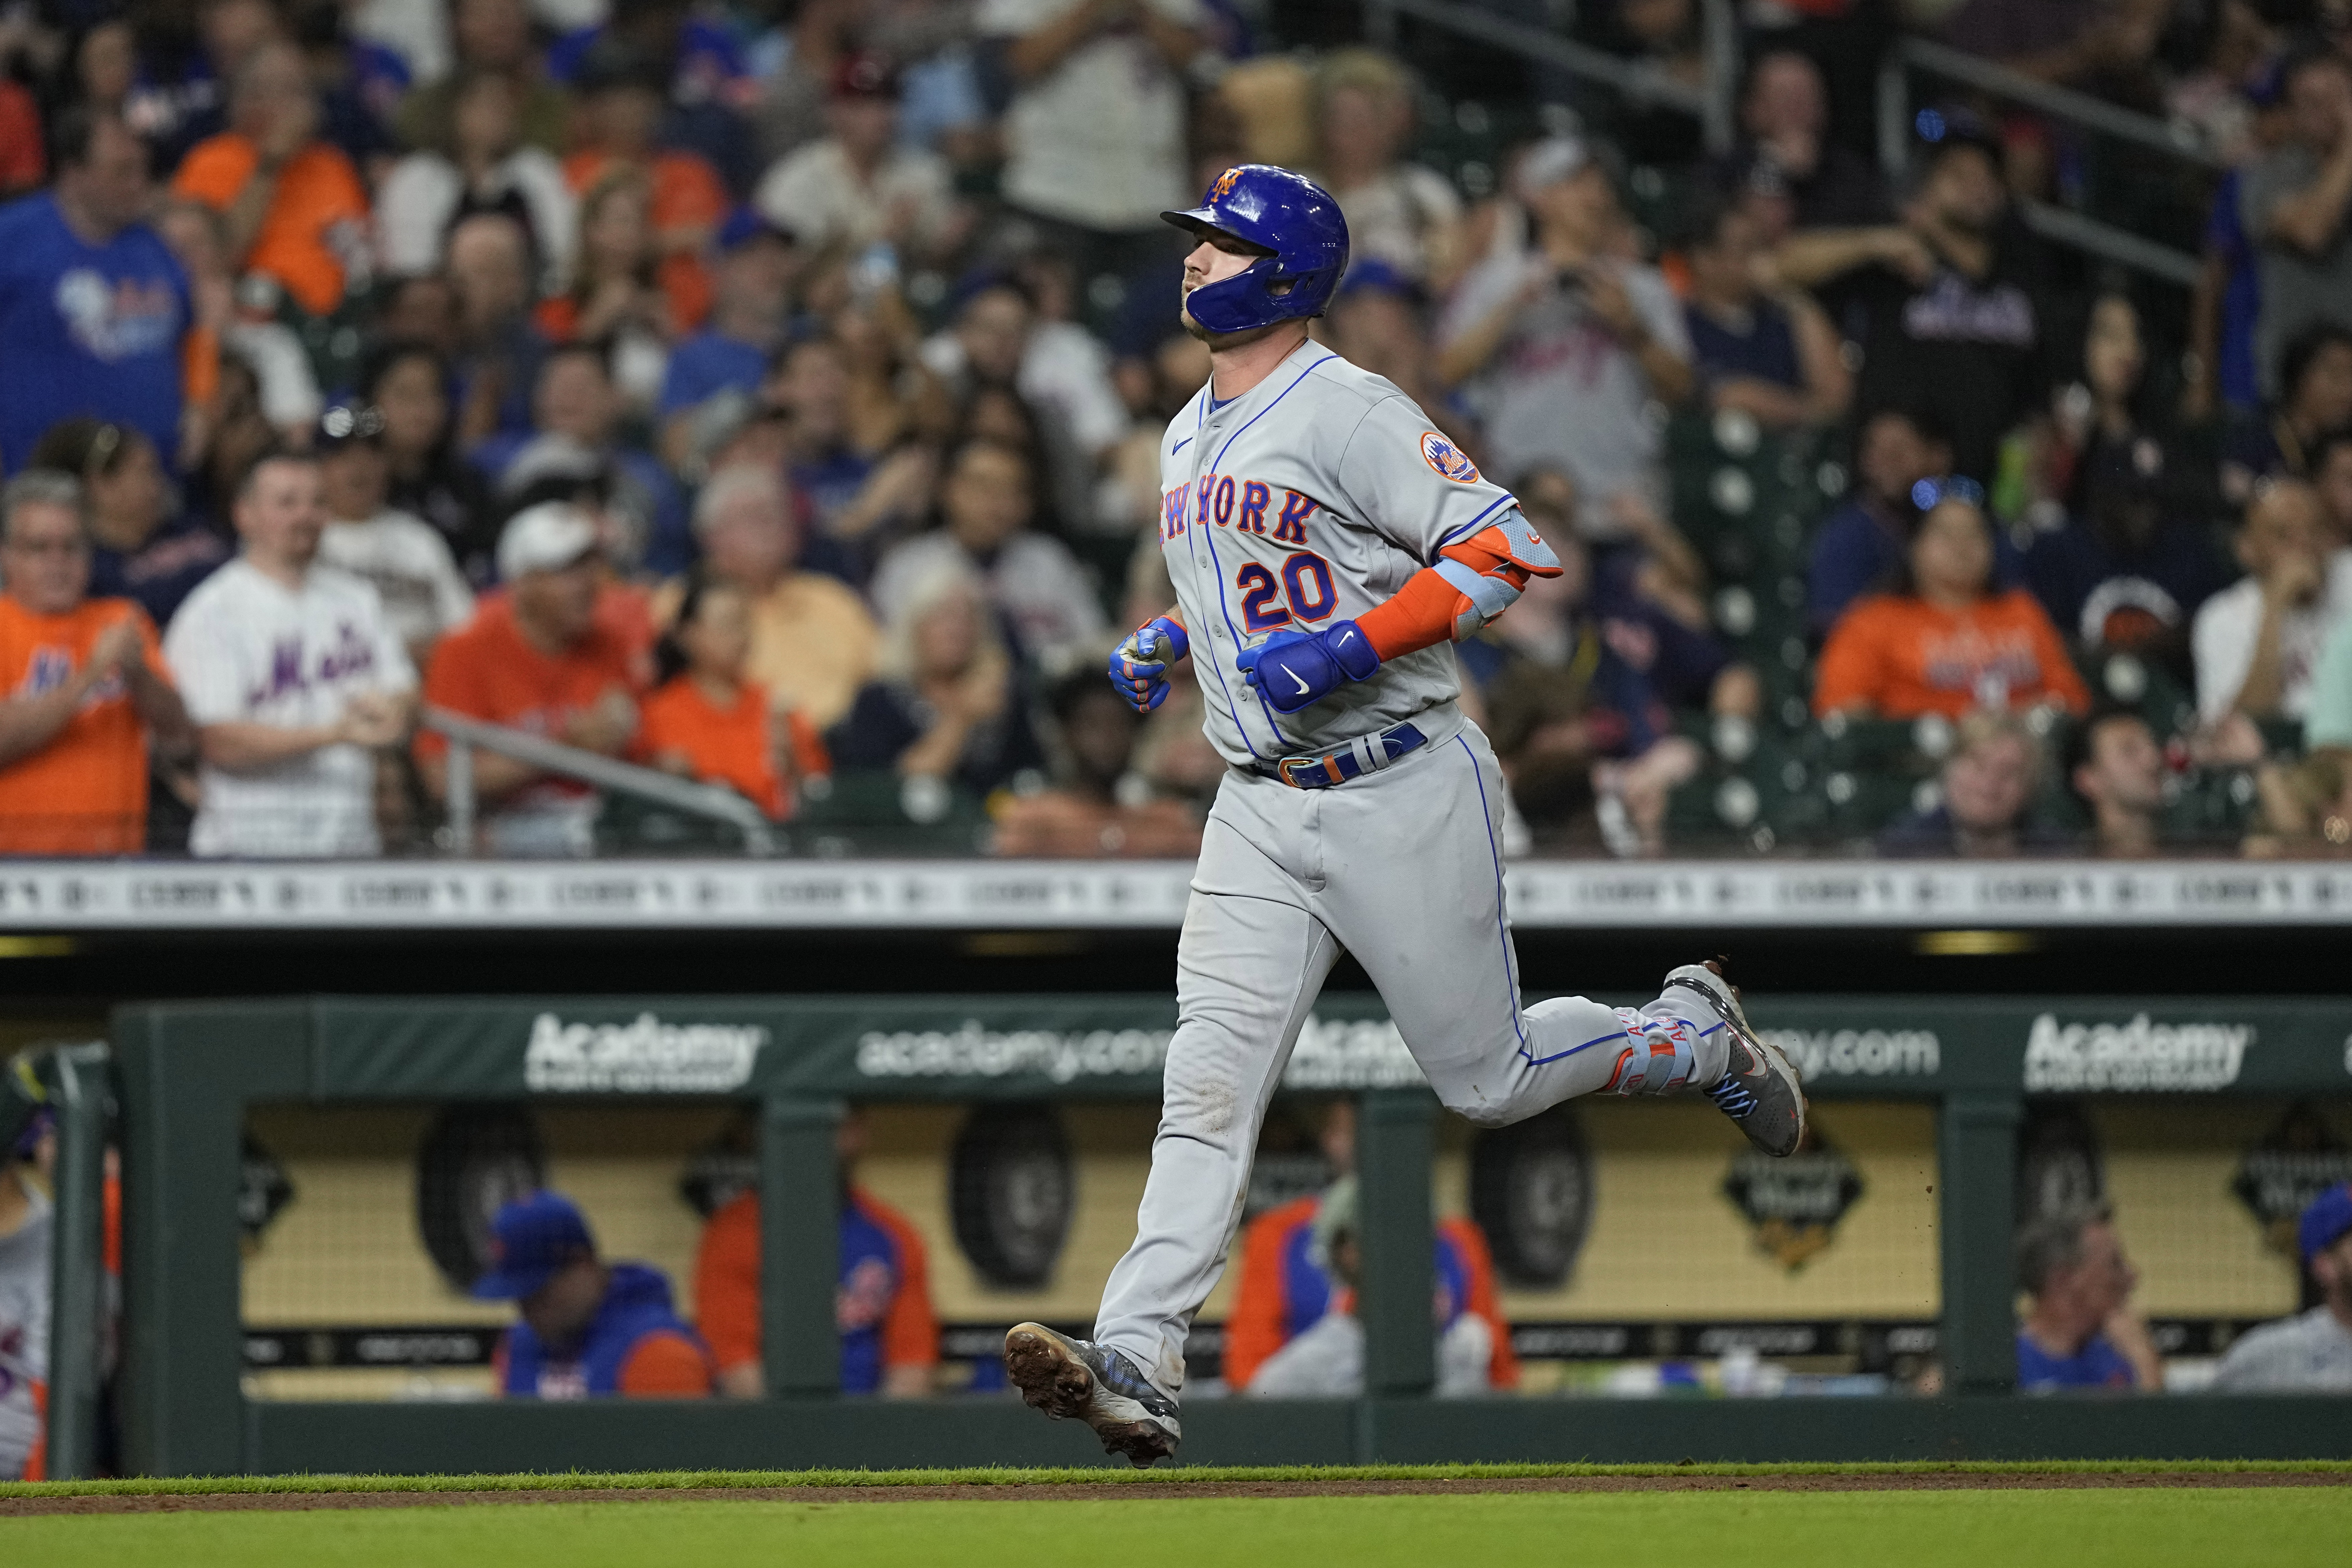 Pete Alonso, Albert Pujols, Juan Soto, Ronald Acuña Jr. are in for